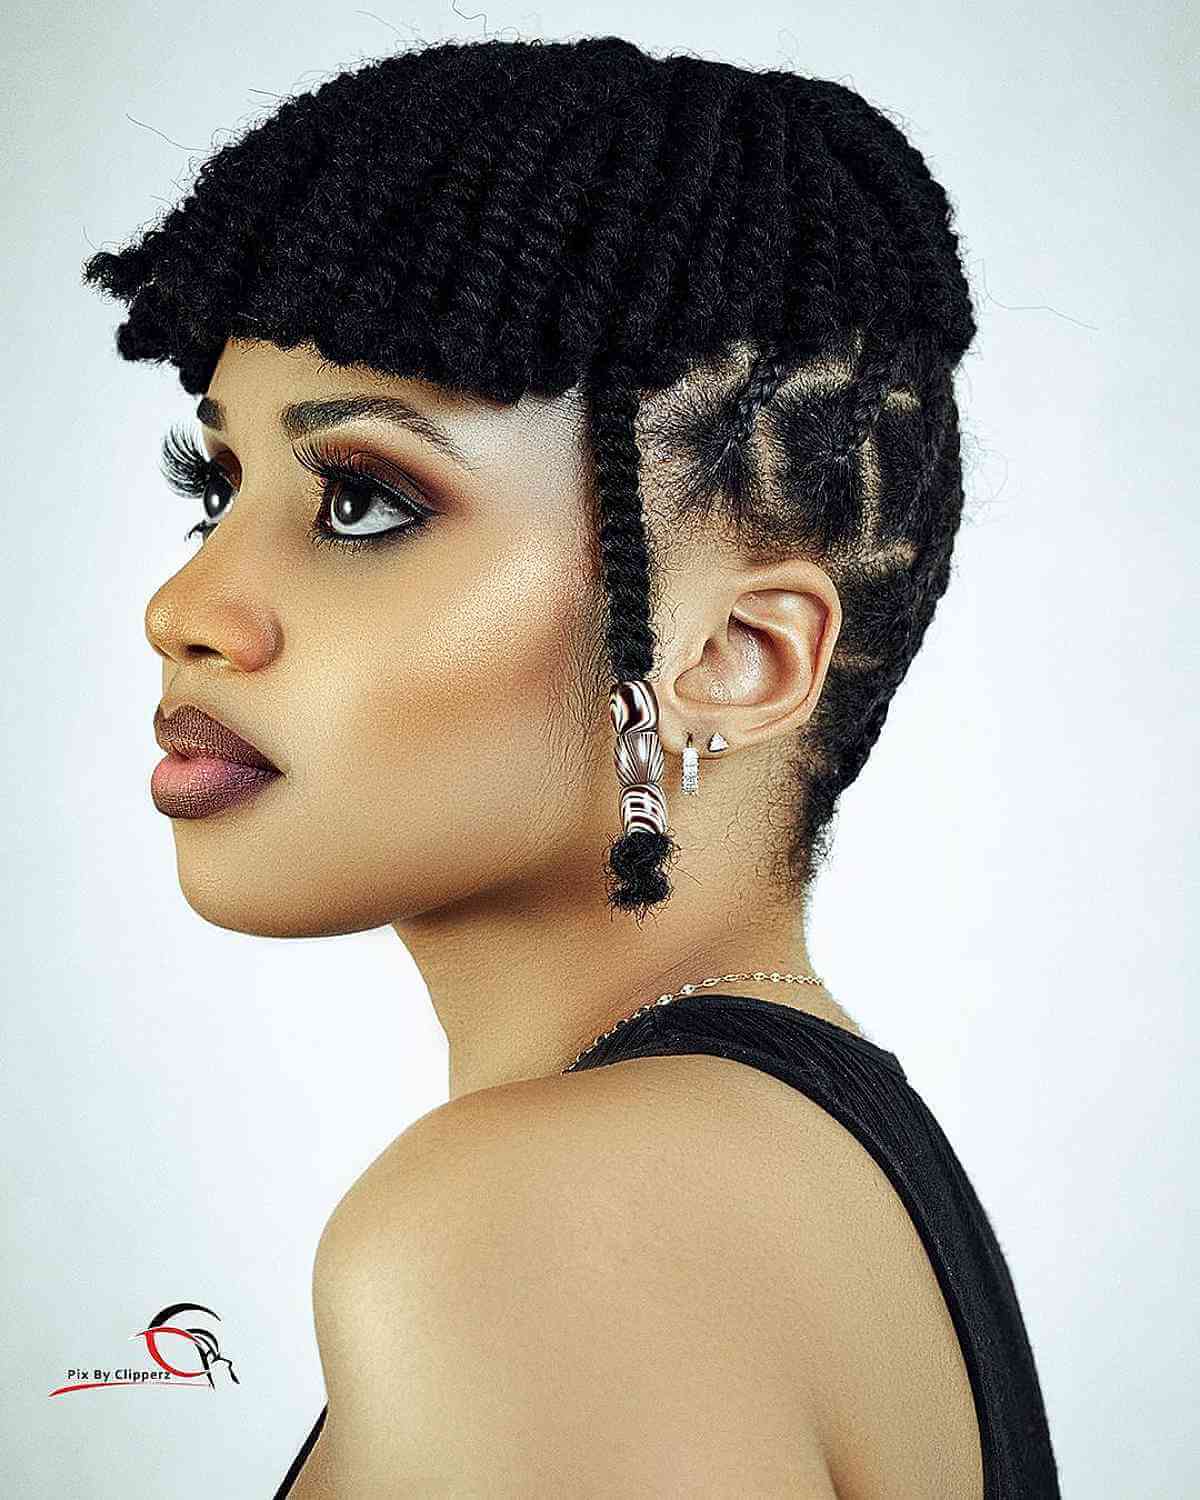 50 Best African Women Hairstyles & Haircuts for 2023 in Uganda - 2023